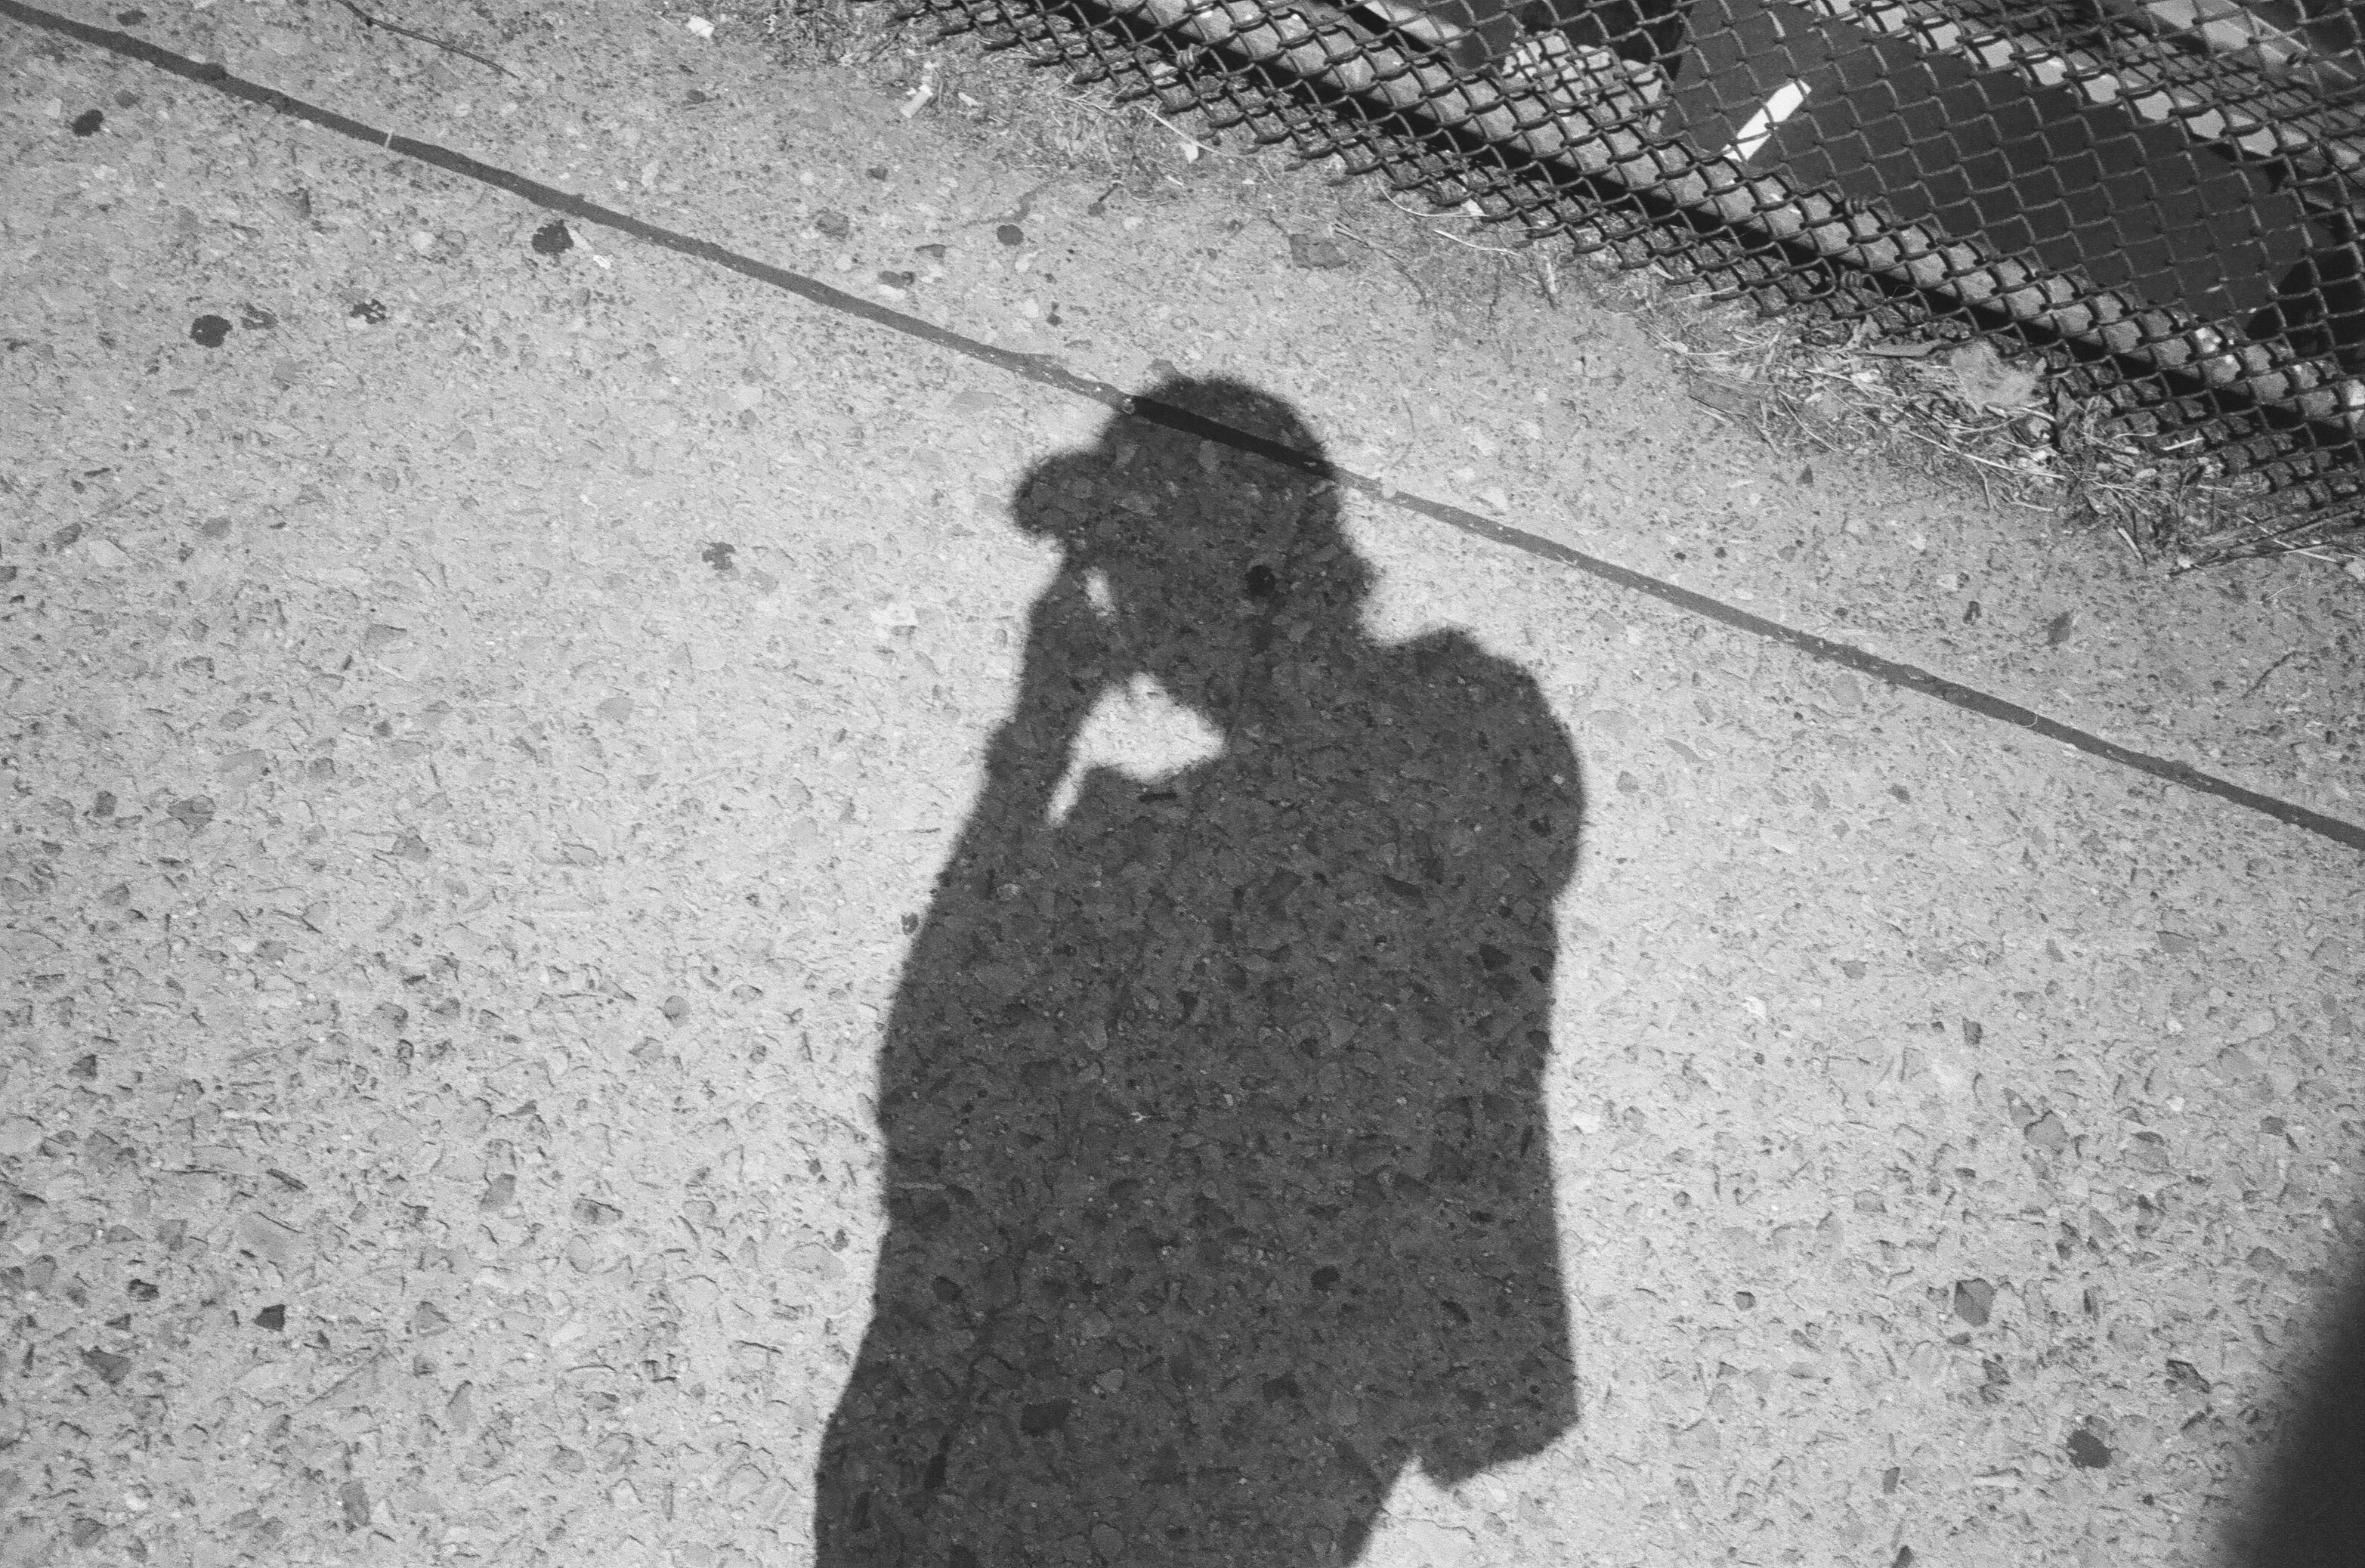 shadow of cameraperson on the ground